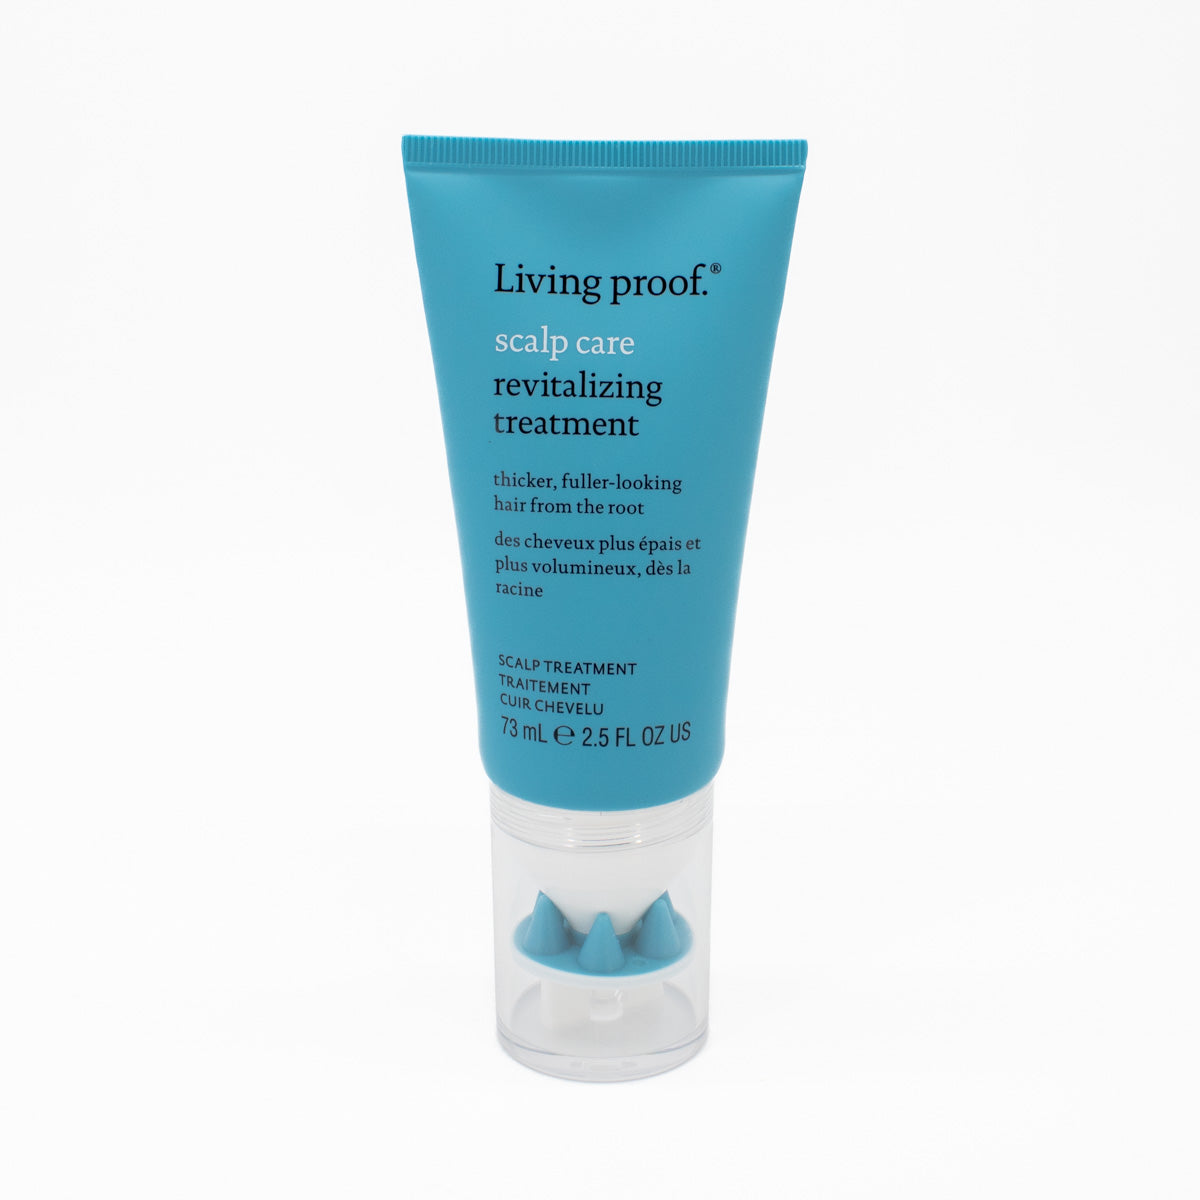 Living proof Scalp Care Revitalizing Treatment 2.5oz - Small Amount Missing